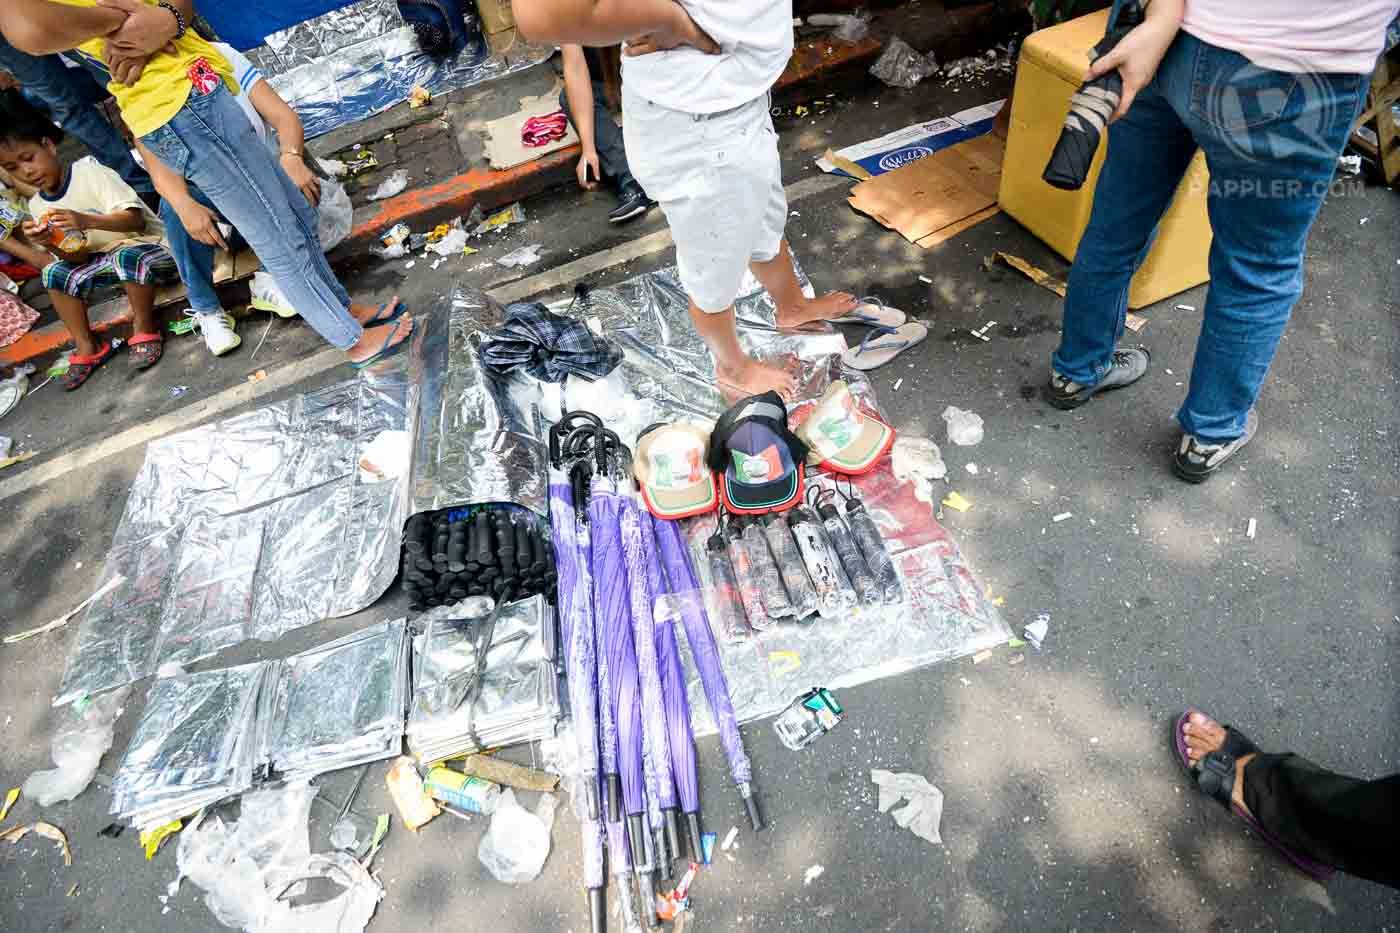 INC merchandise along the streets of Padre Faura—Sleeping mats, caps and umbrellas. Photo by LeAnne Jazul/Rappler